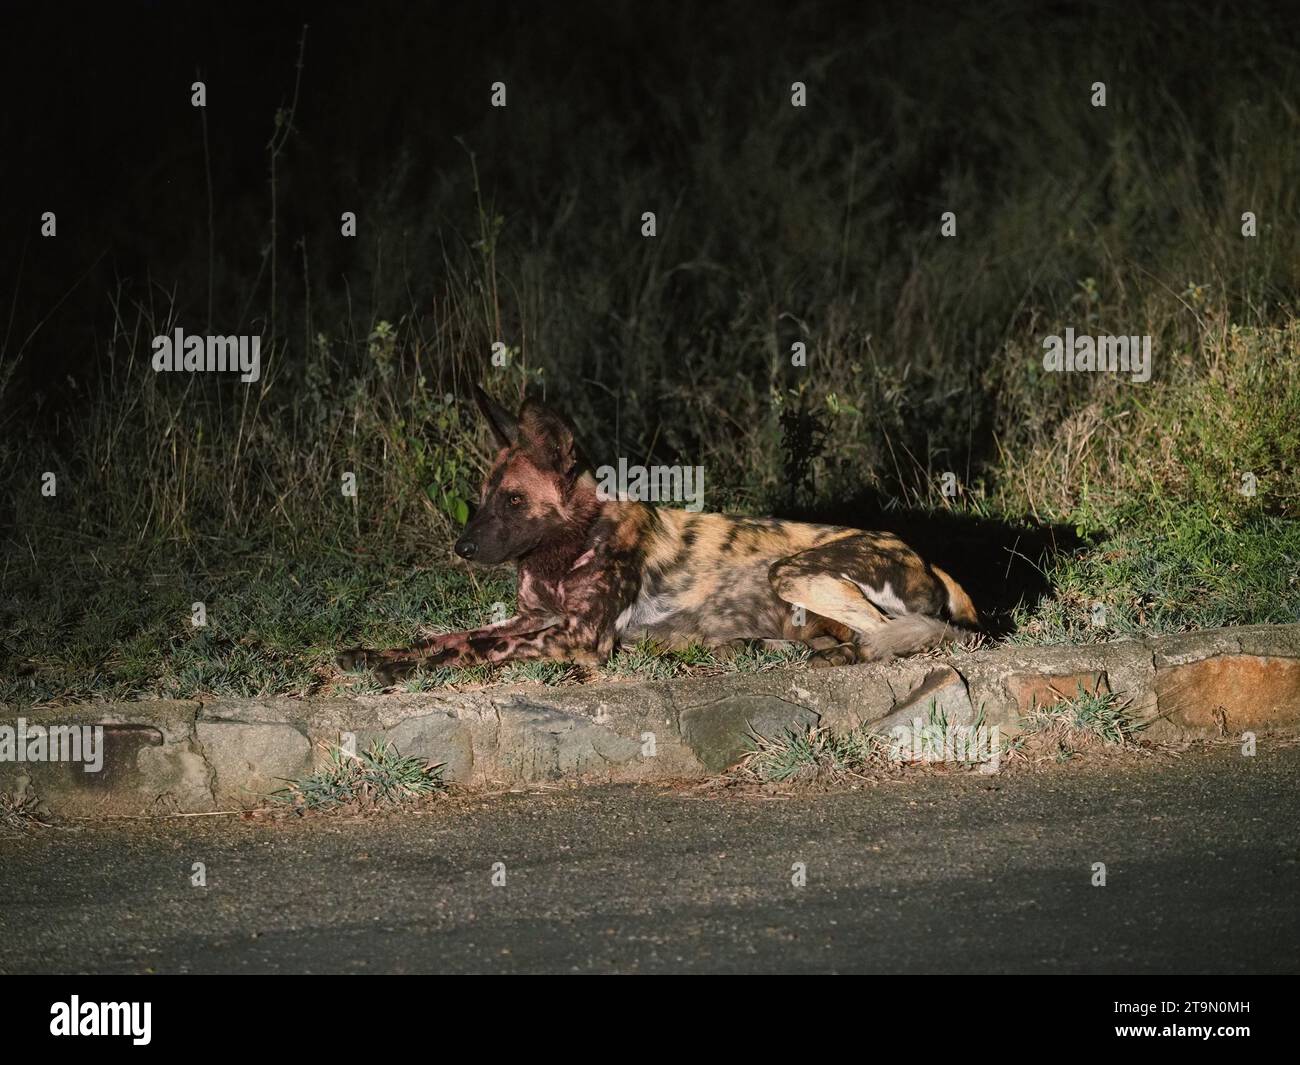 African wild dog (lycaon pictus) or painted dog, by the side of the road in the evening. They are extremely rare. Kruger National Park, South Africa Stock Photo